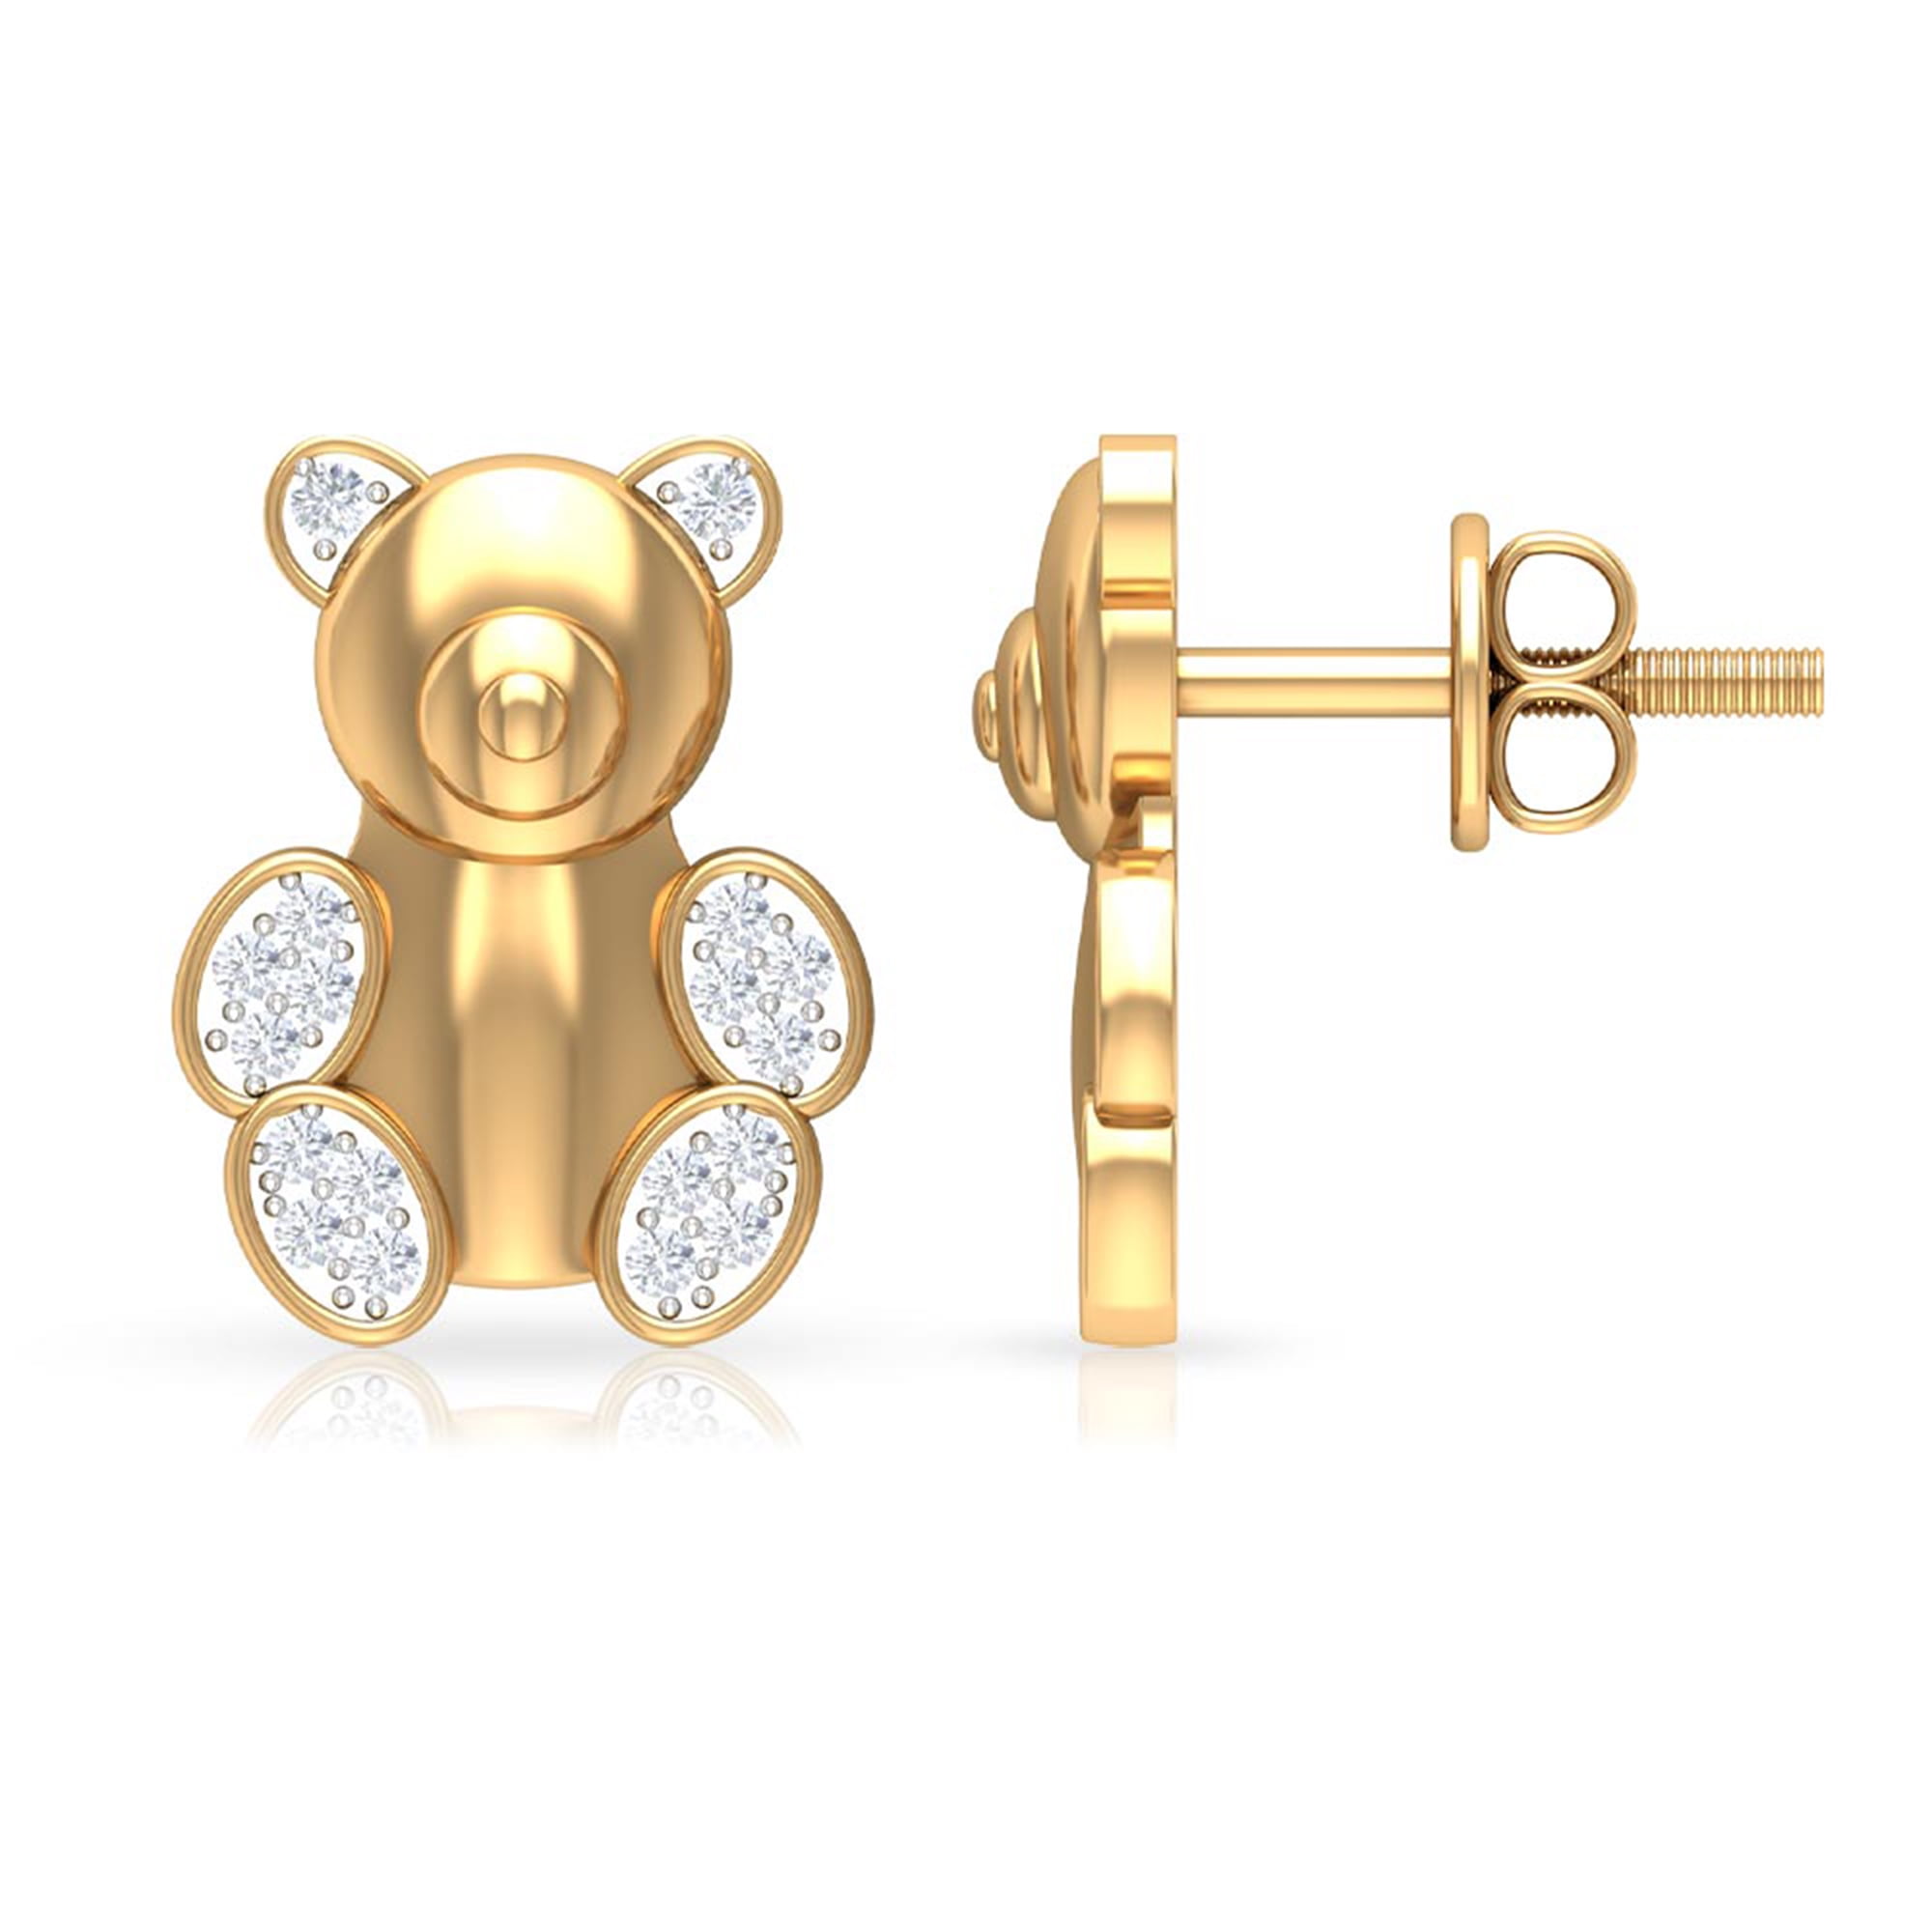 Birthday Gift - Cute Teddy Bear Earrings with Diamond in Gold, Natural  Diamond Stud Earrings for Women (HI-SI Quality), 14K Yellow Gold